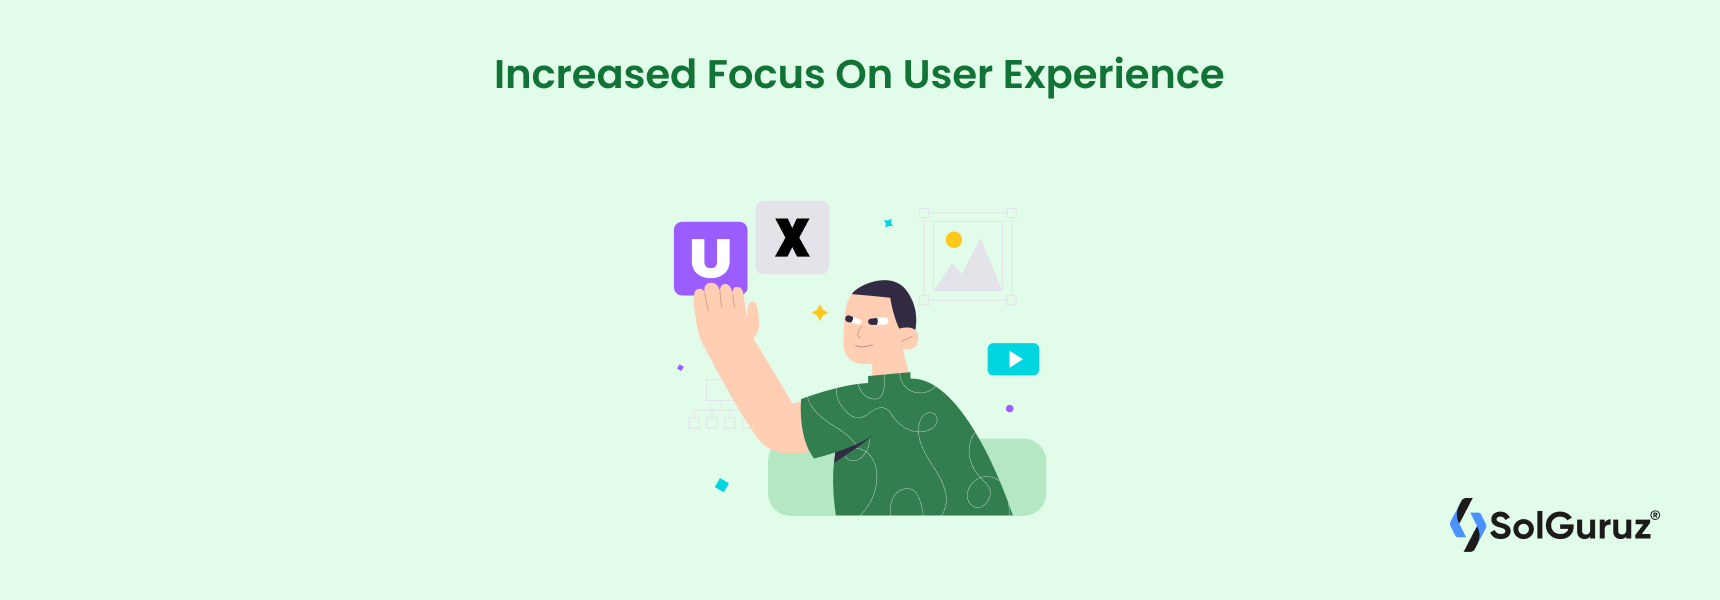 Increased Focus on User Experience